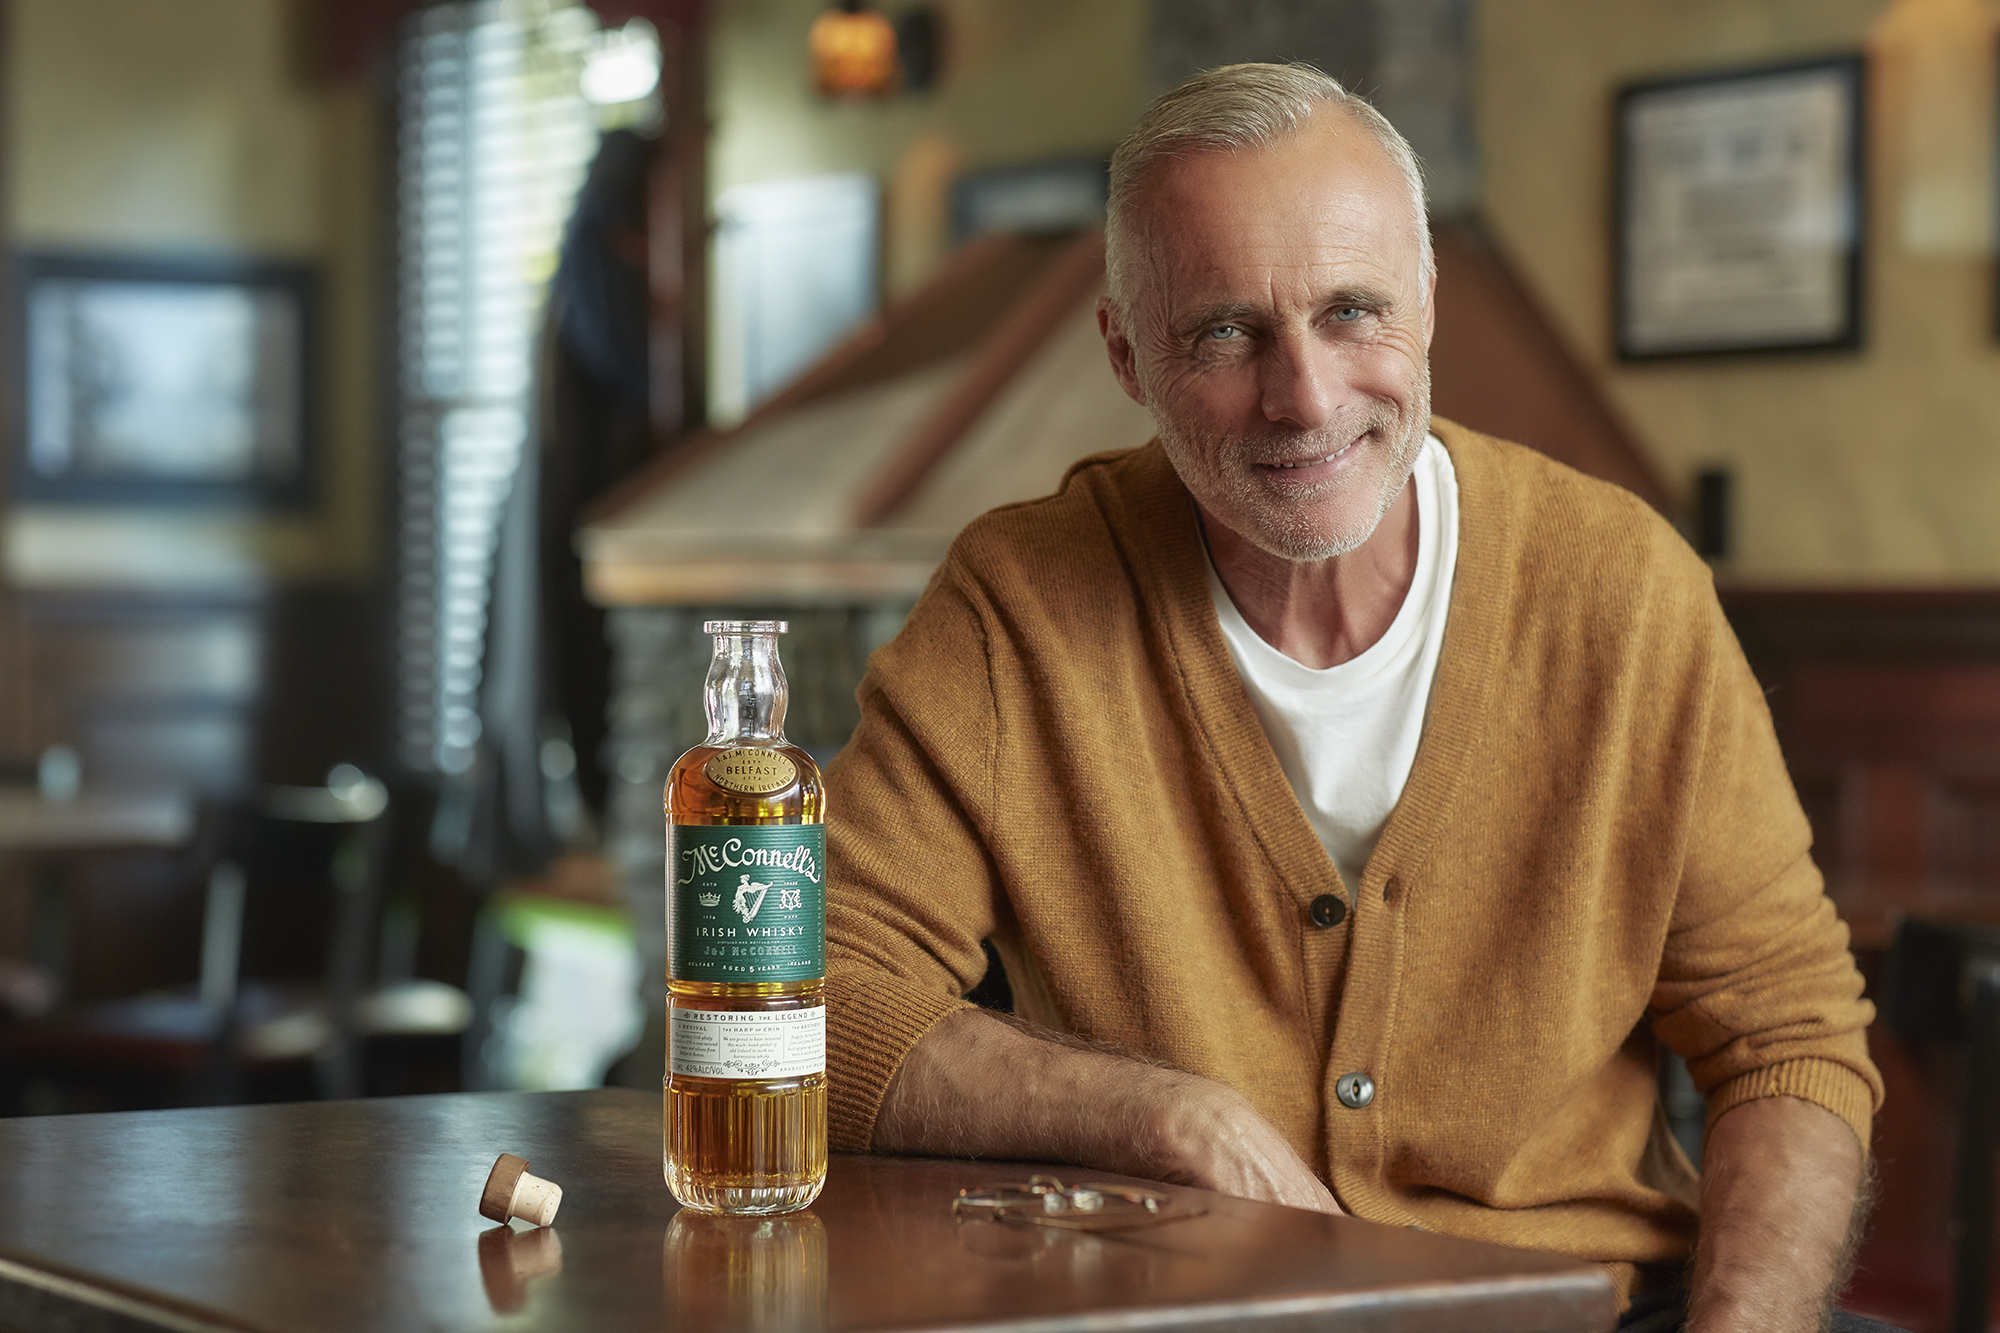 McConnell’s whiskey wins top Polish award